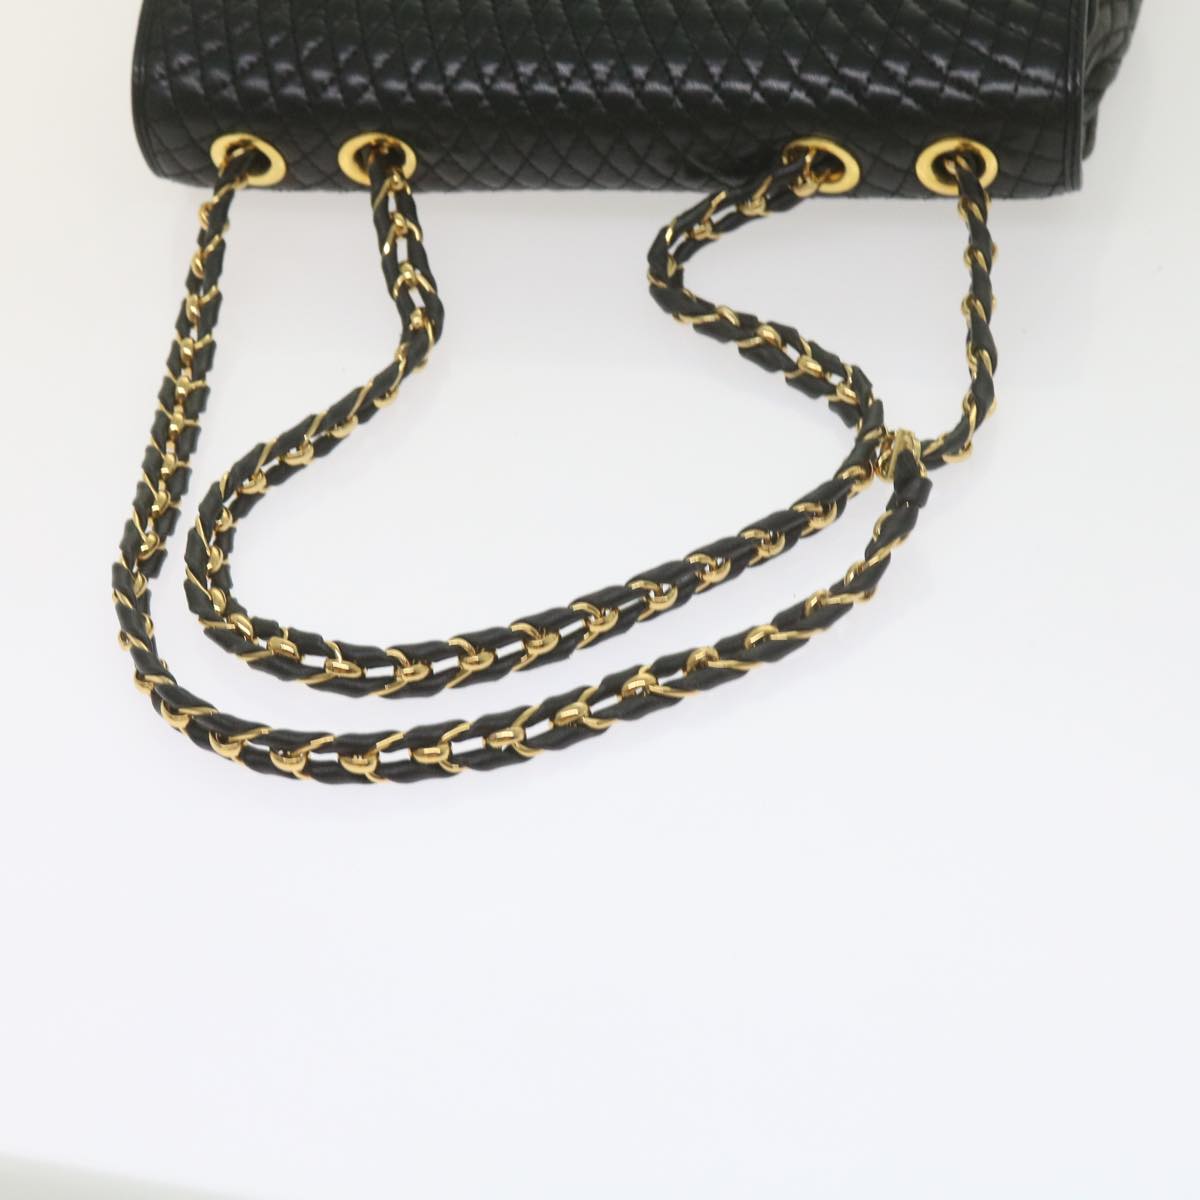 BALLY Quilted Chain Shoulder Bag Leather Black Auth am5308